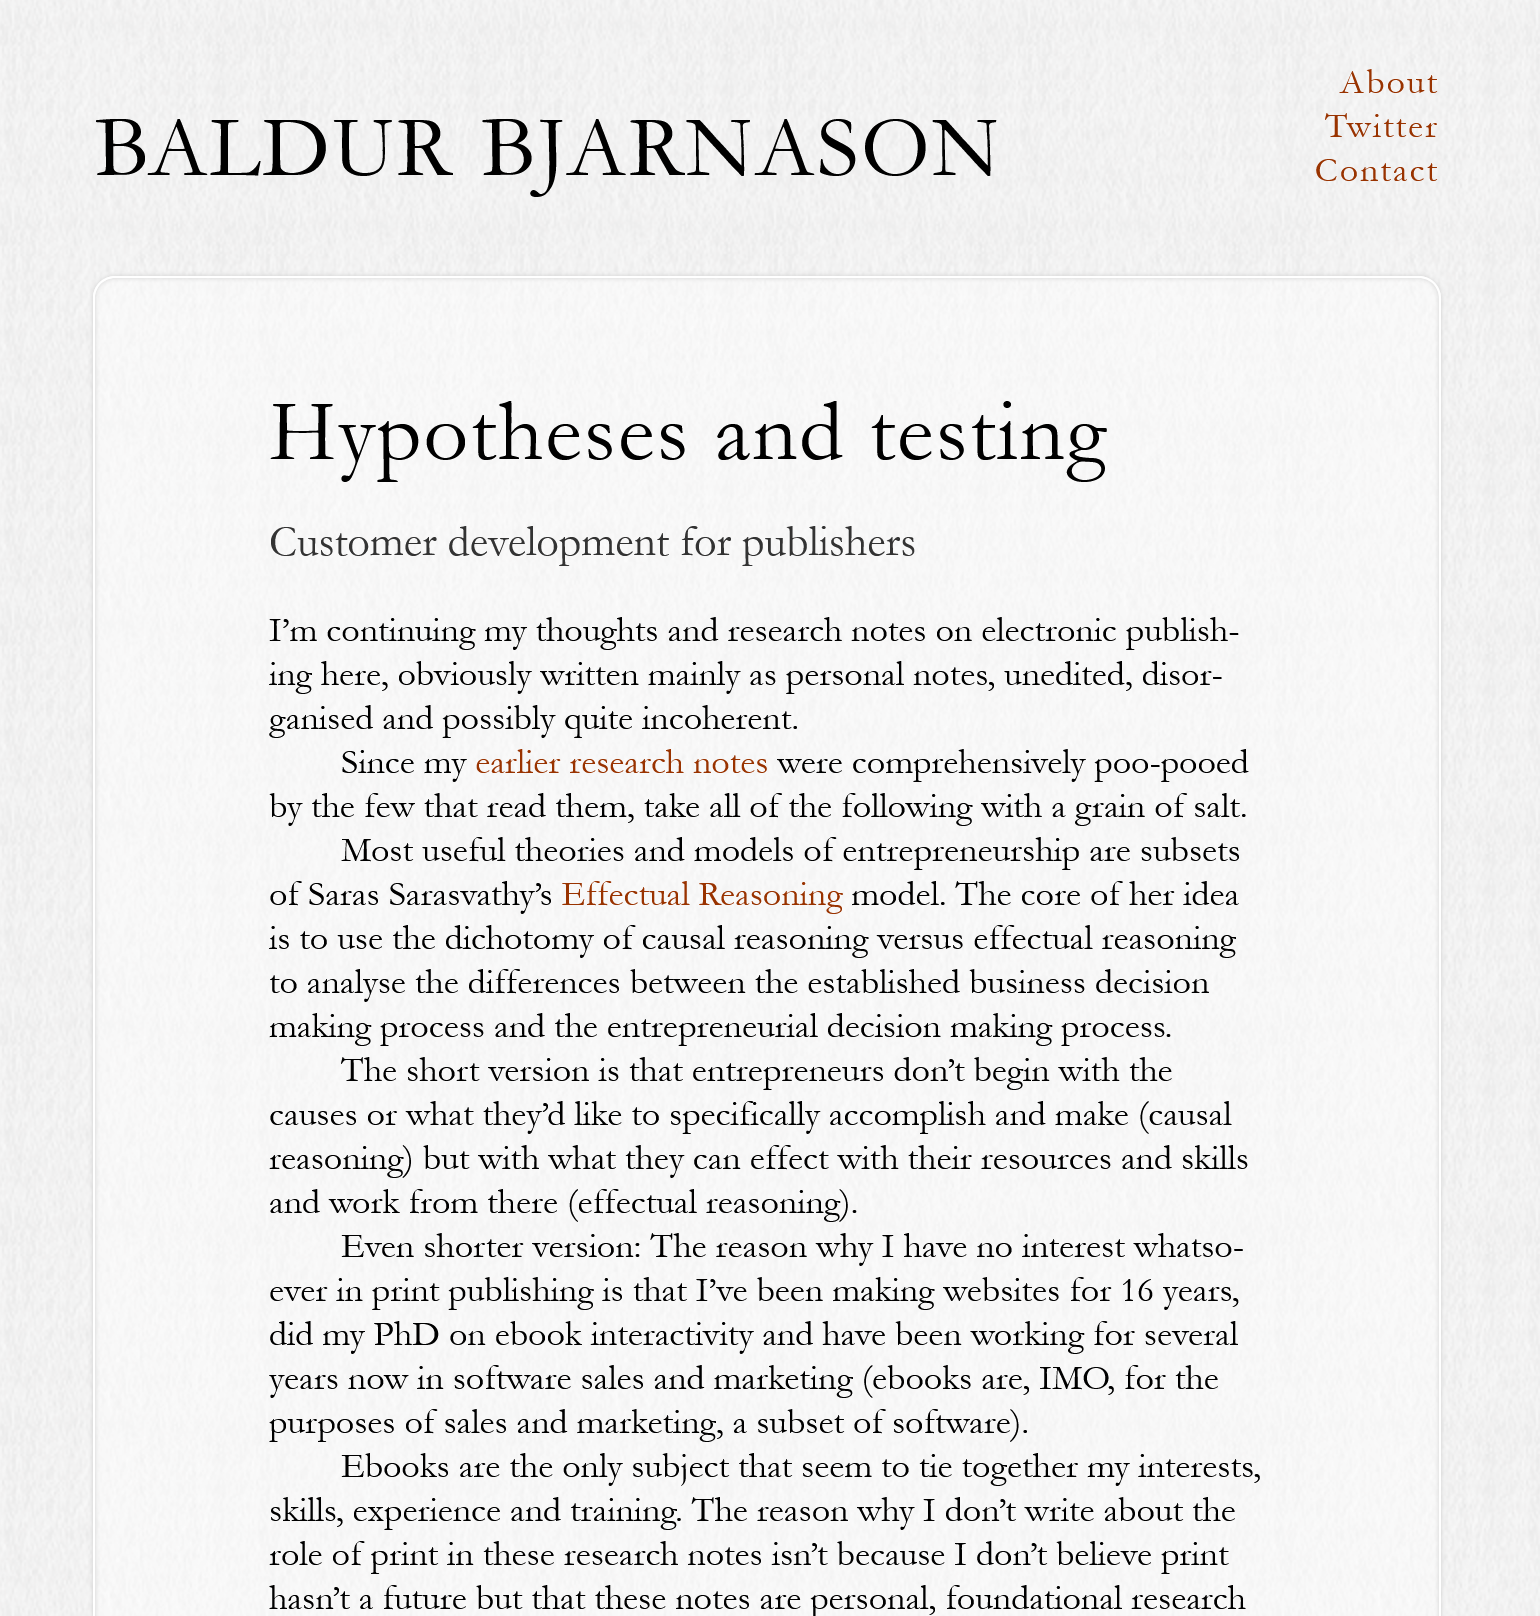 A screen shot of a blog post with a decade old design, looks a bit like a page out of a book